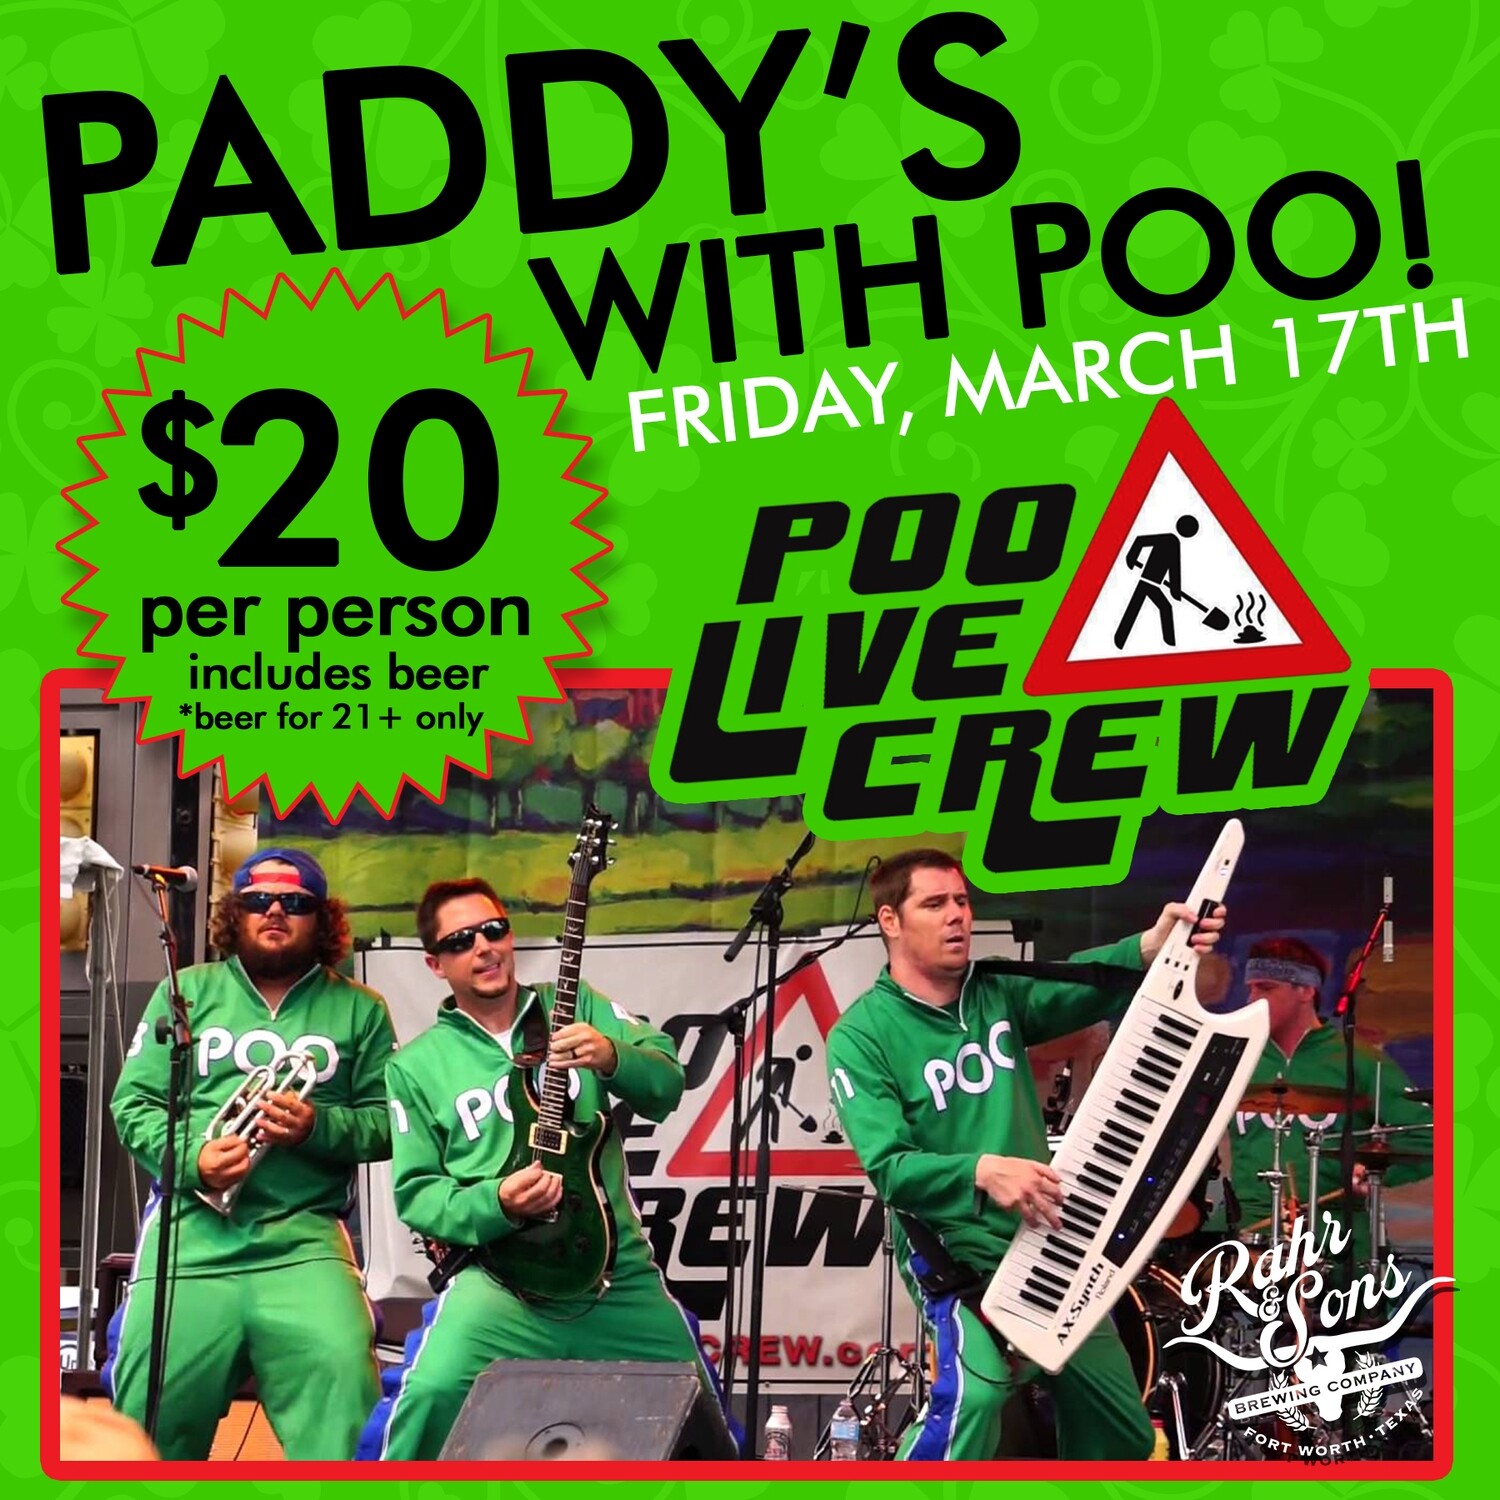 PADDY'S WITH POO!